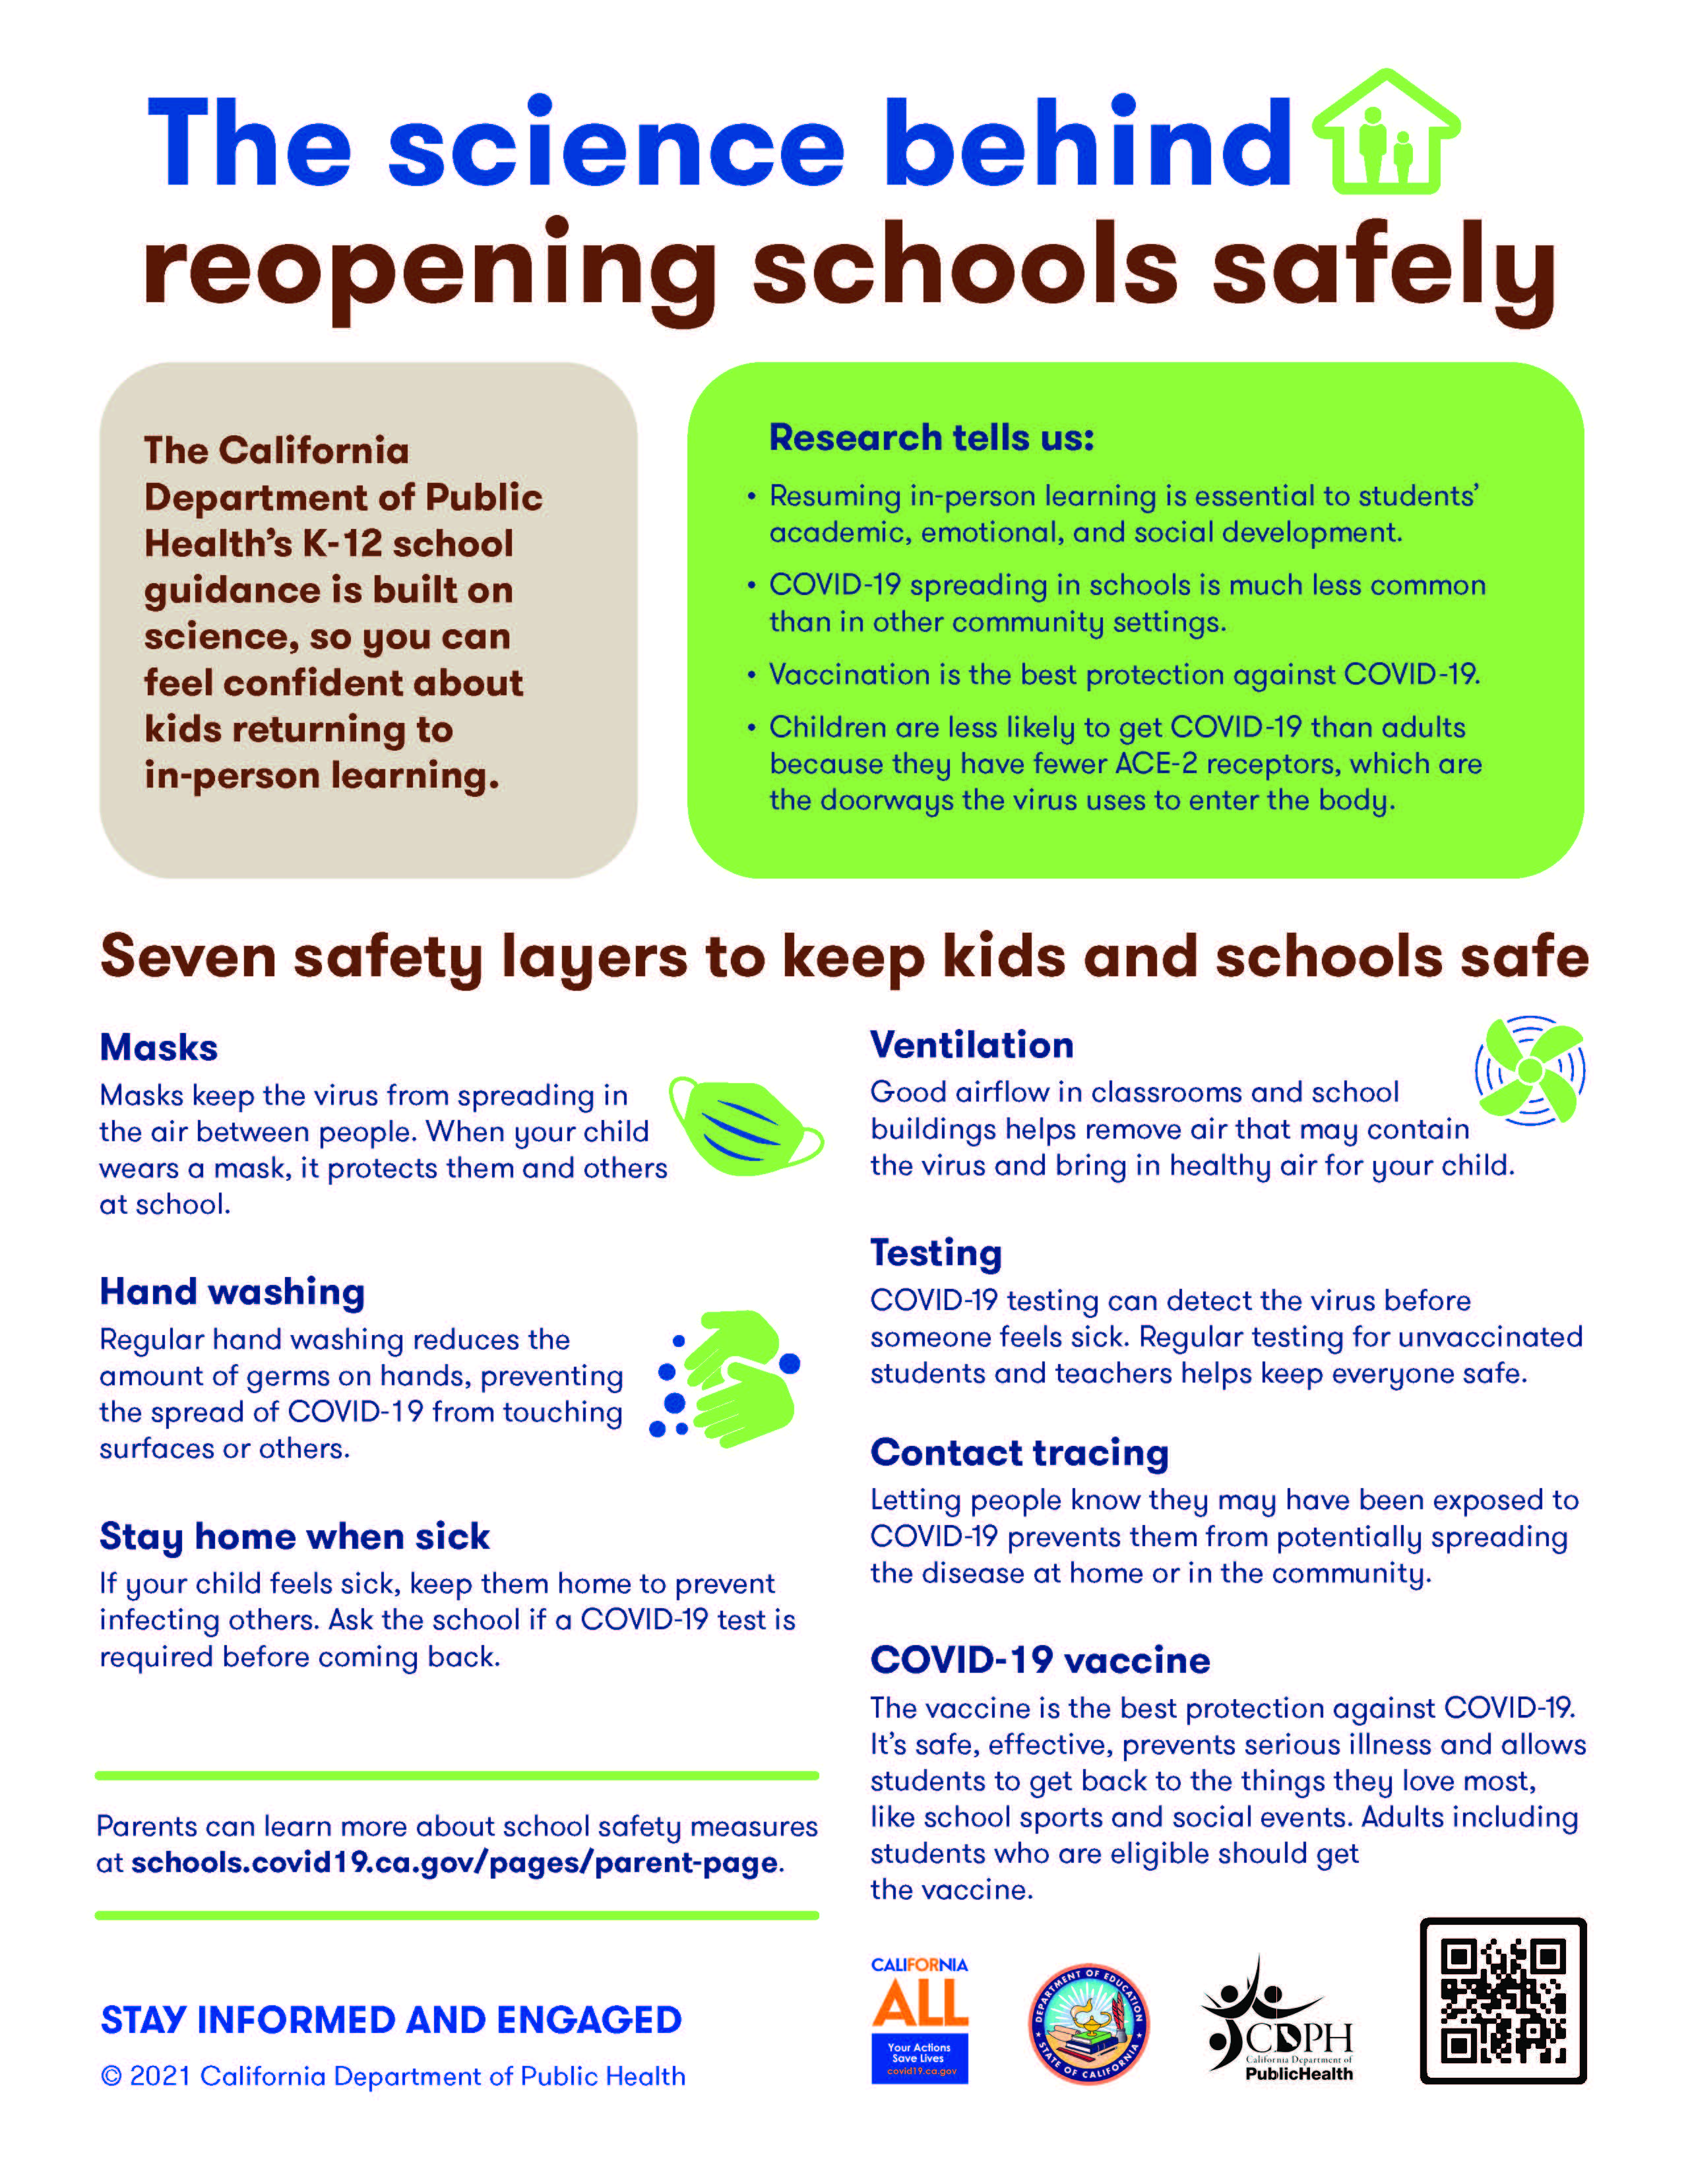 The science behind reopening schools safely